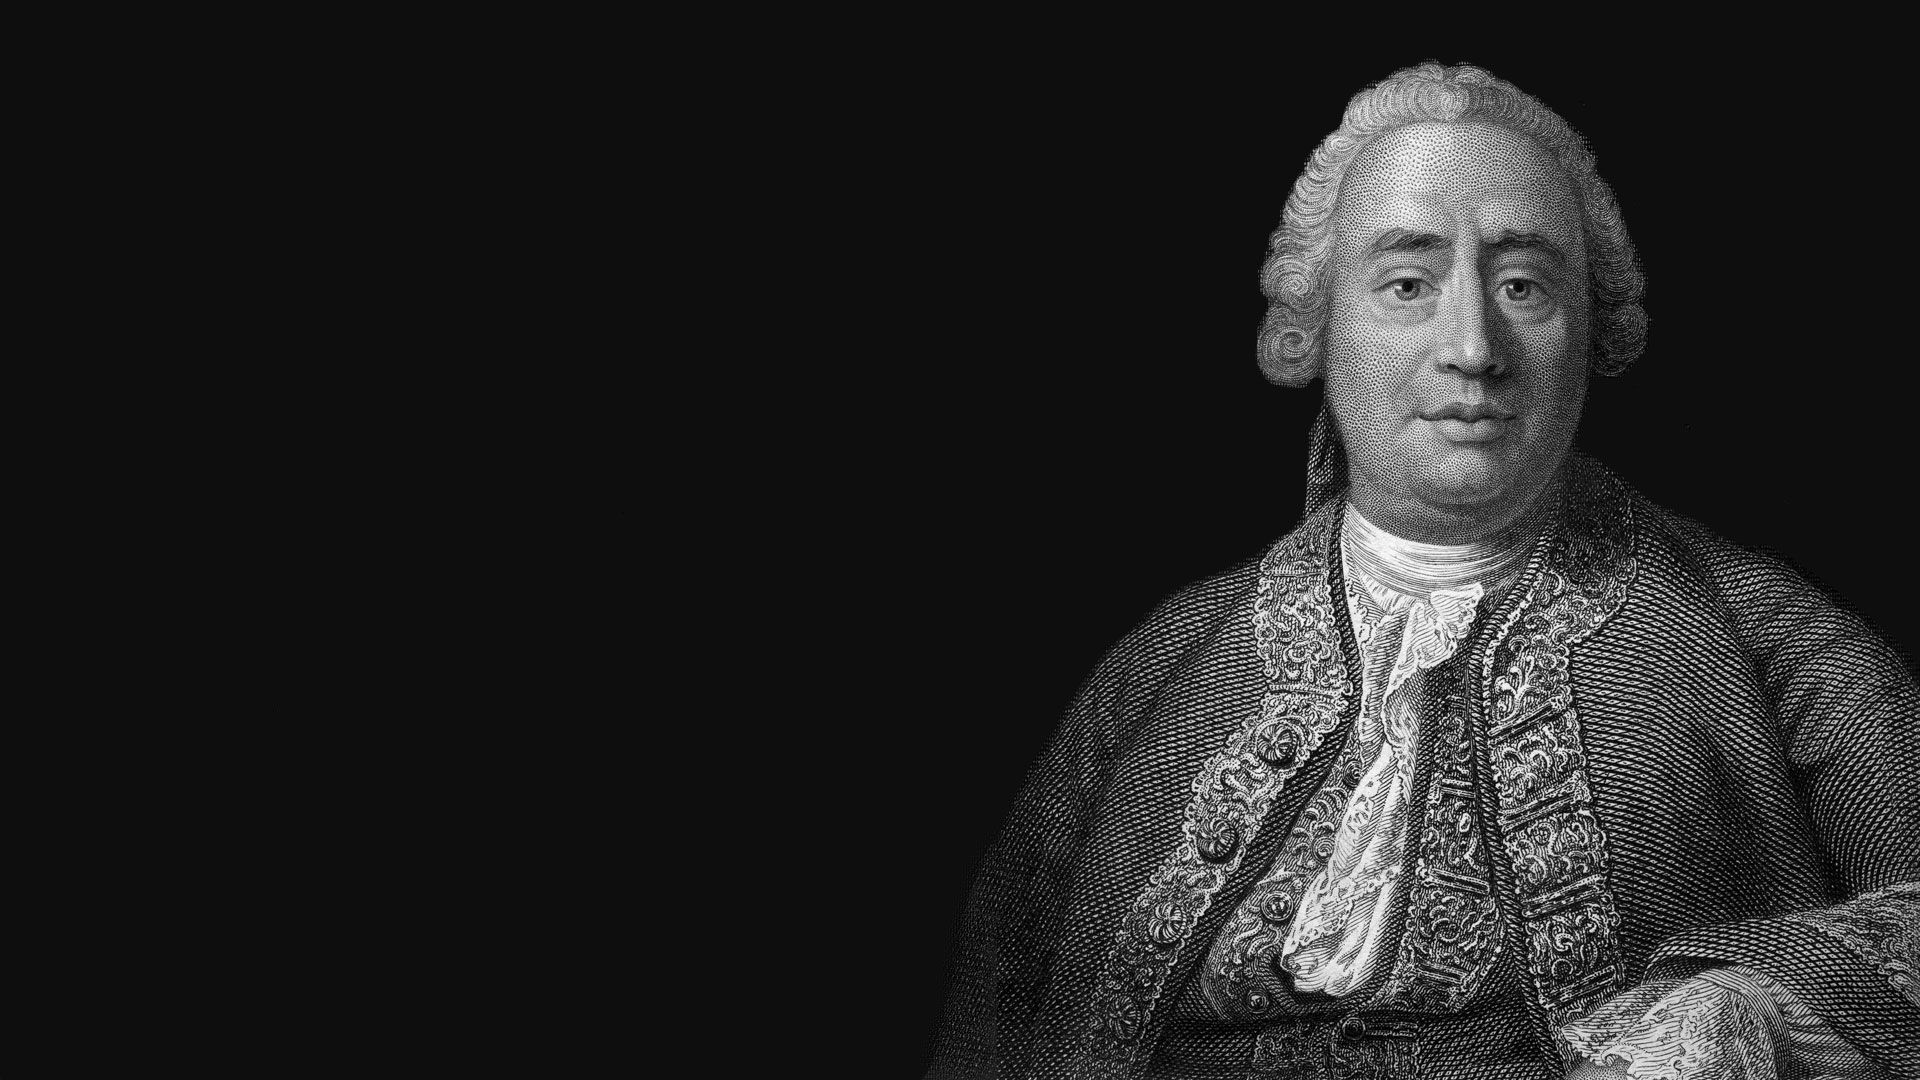 Biography: David Hume: Stripping Away Hope in the Name of Enlightenment